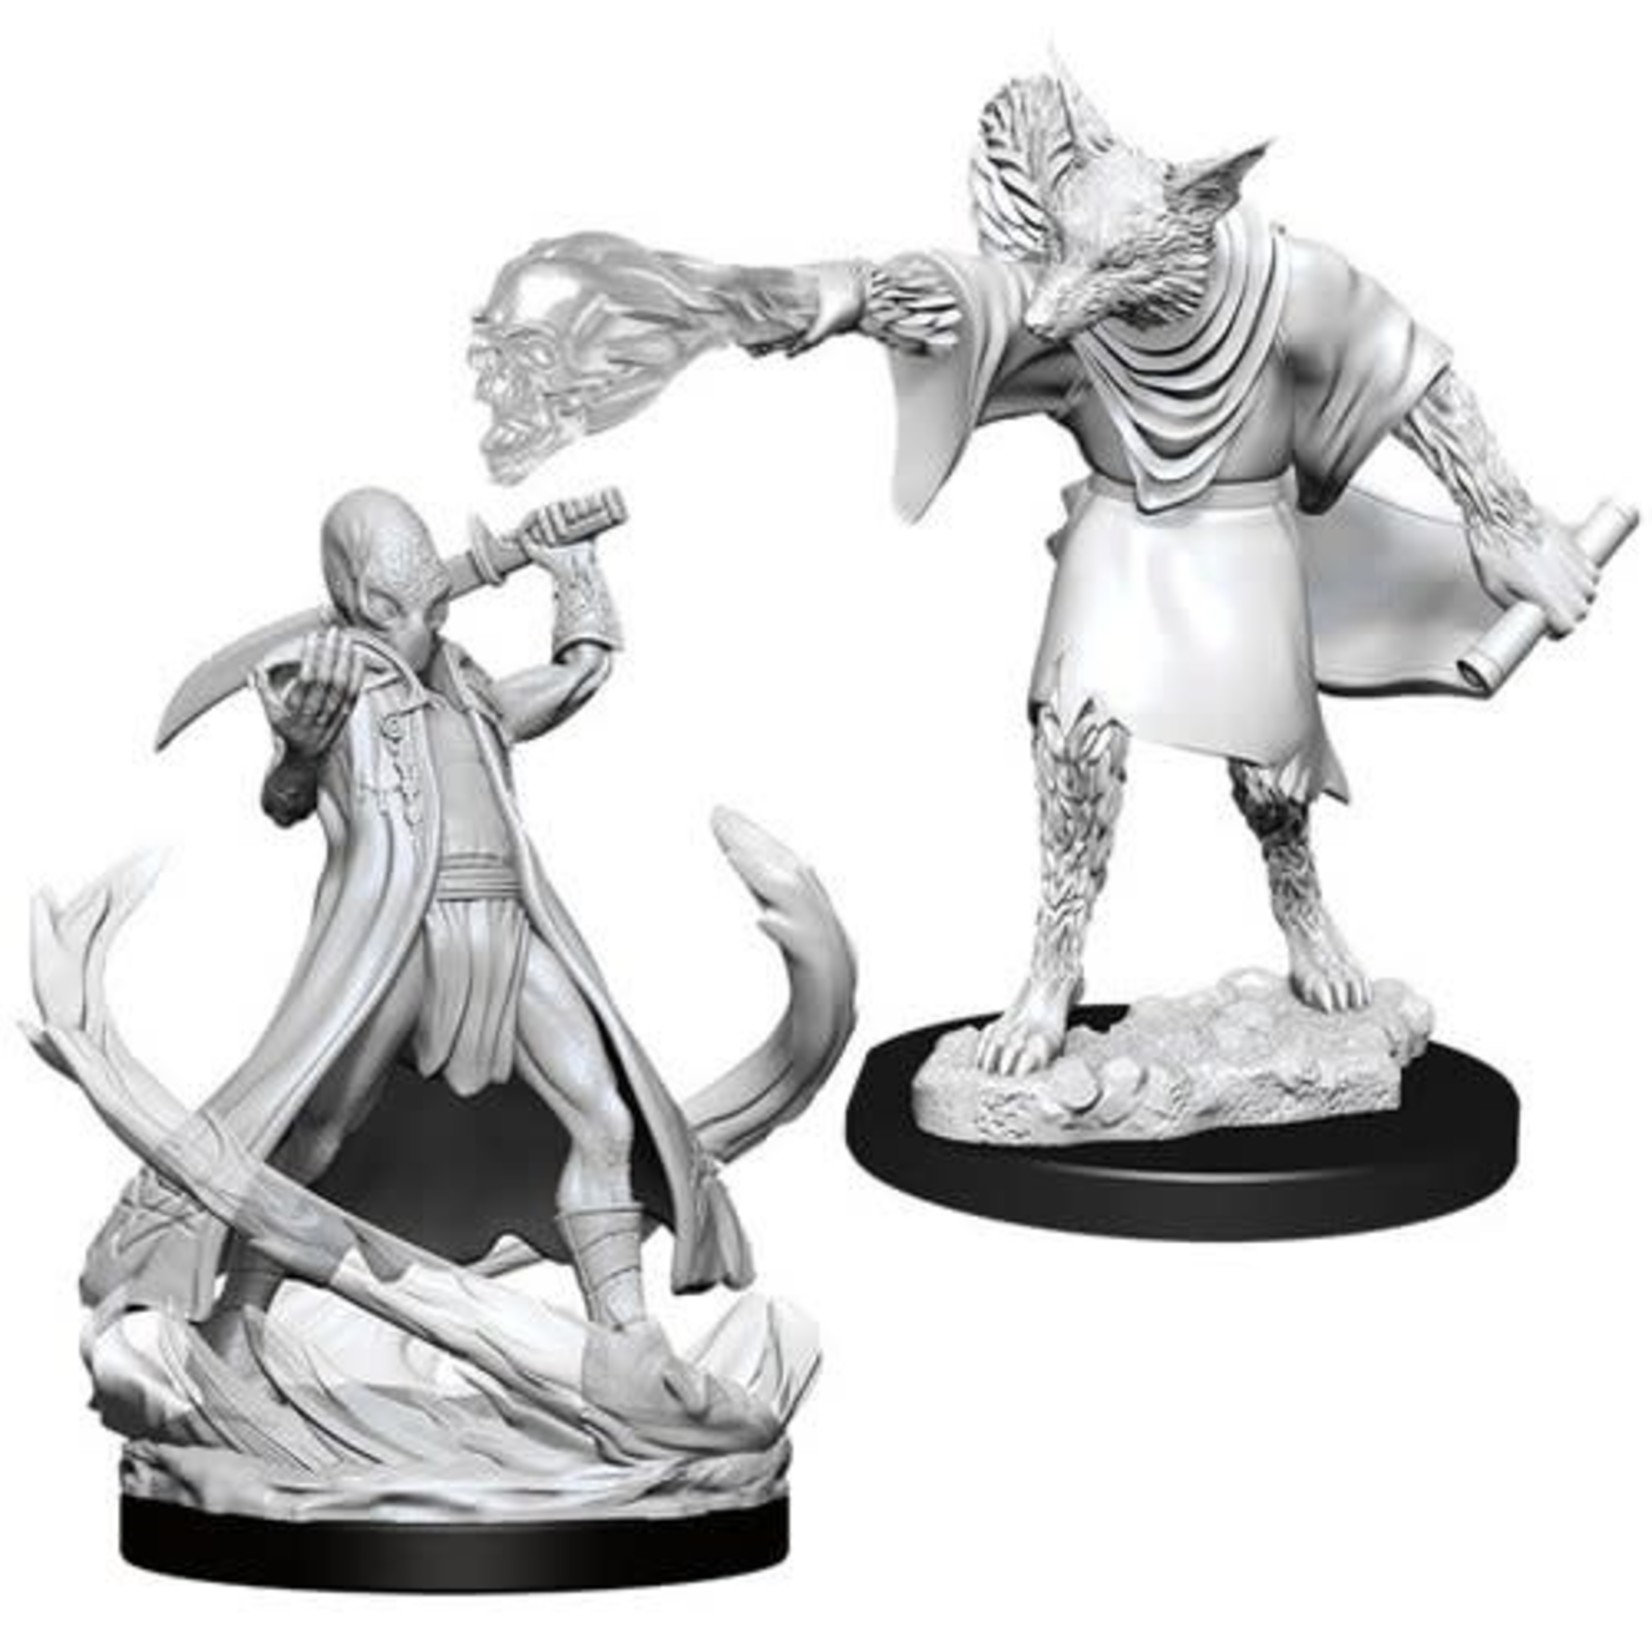 WizKids Dungeons and Dragons Nolzur's Marvelous Minis Arcanaloth and Ultroloth